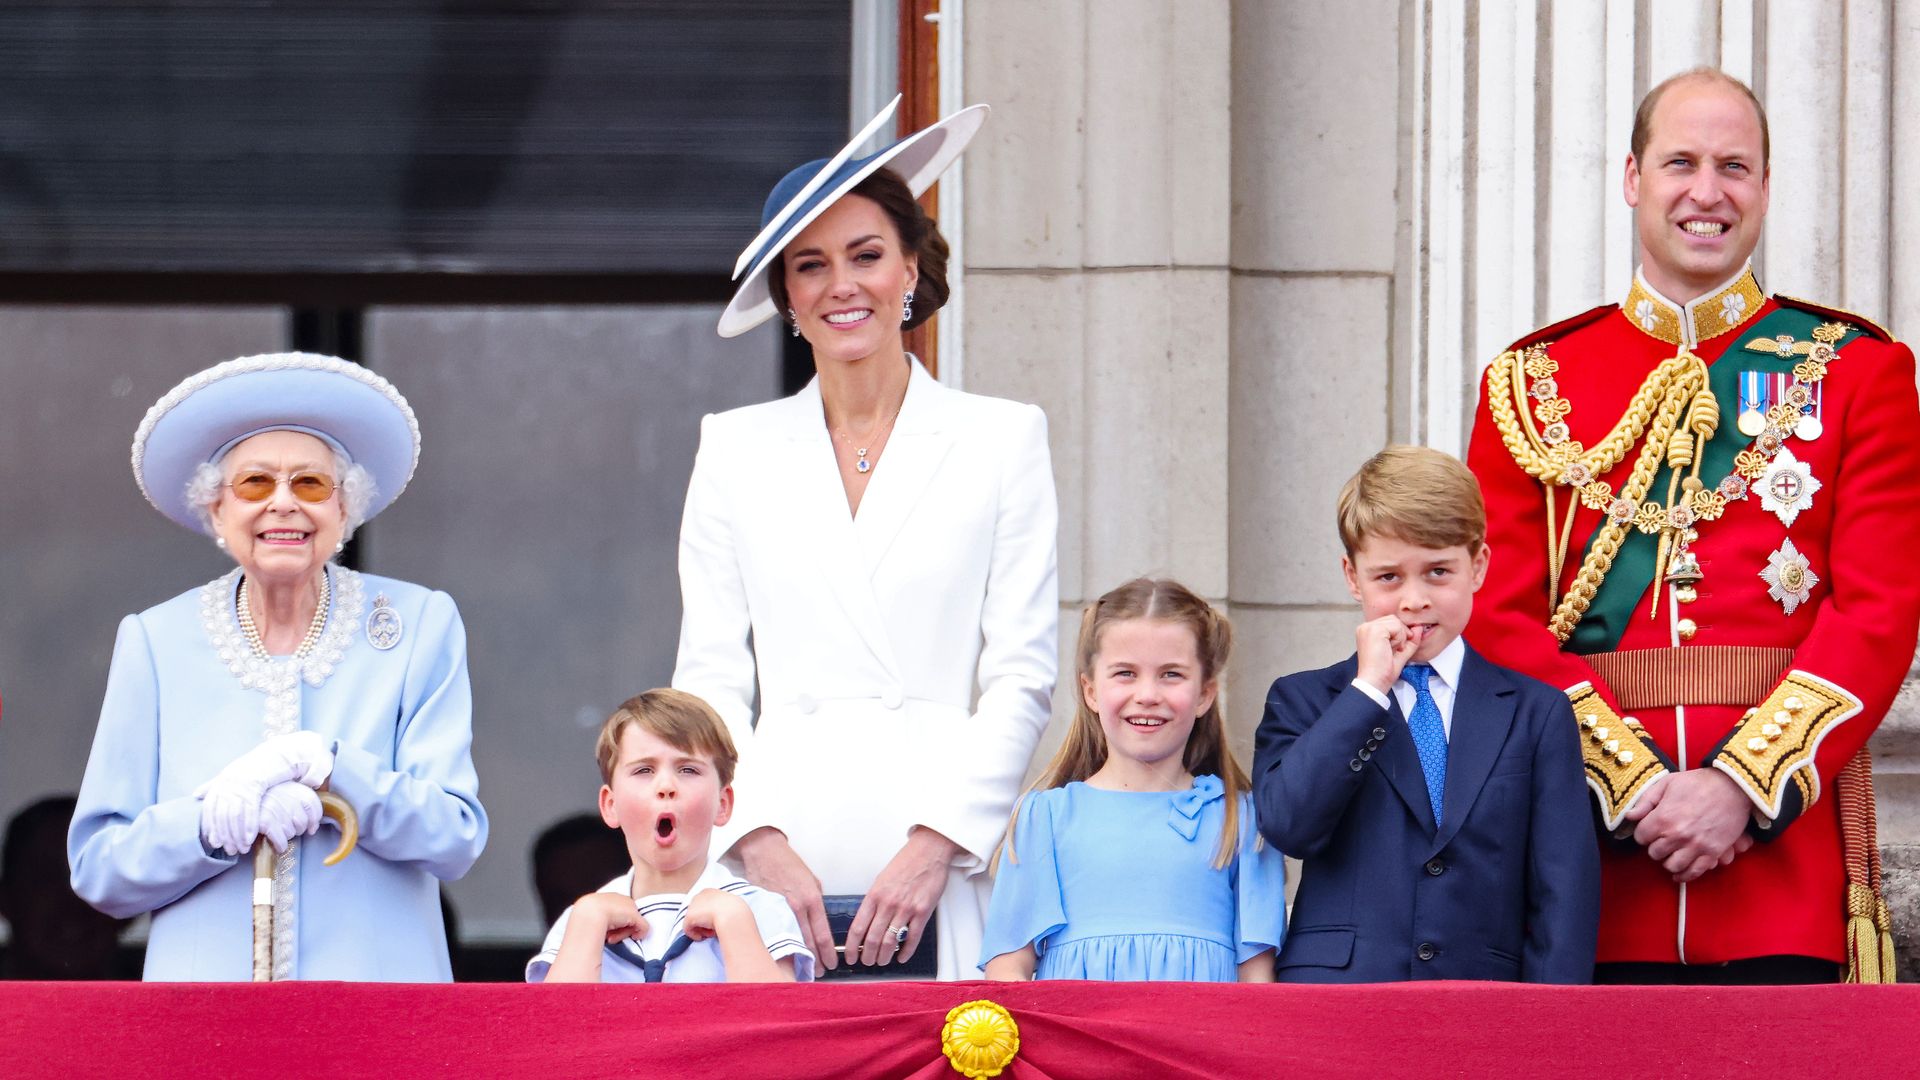 Queen Elizabeth II and the Wales family watch the RAF flypast on the balcony of Buckingham Palace during the Trooping the Colour parade in 2022